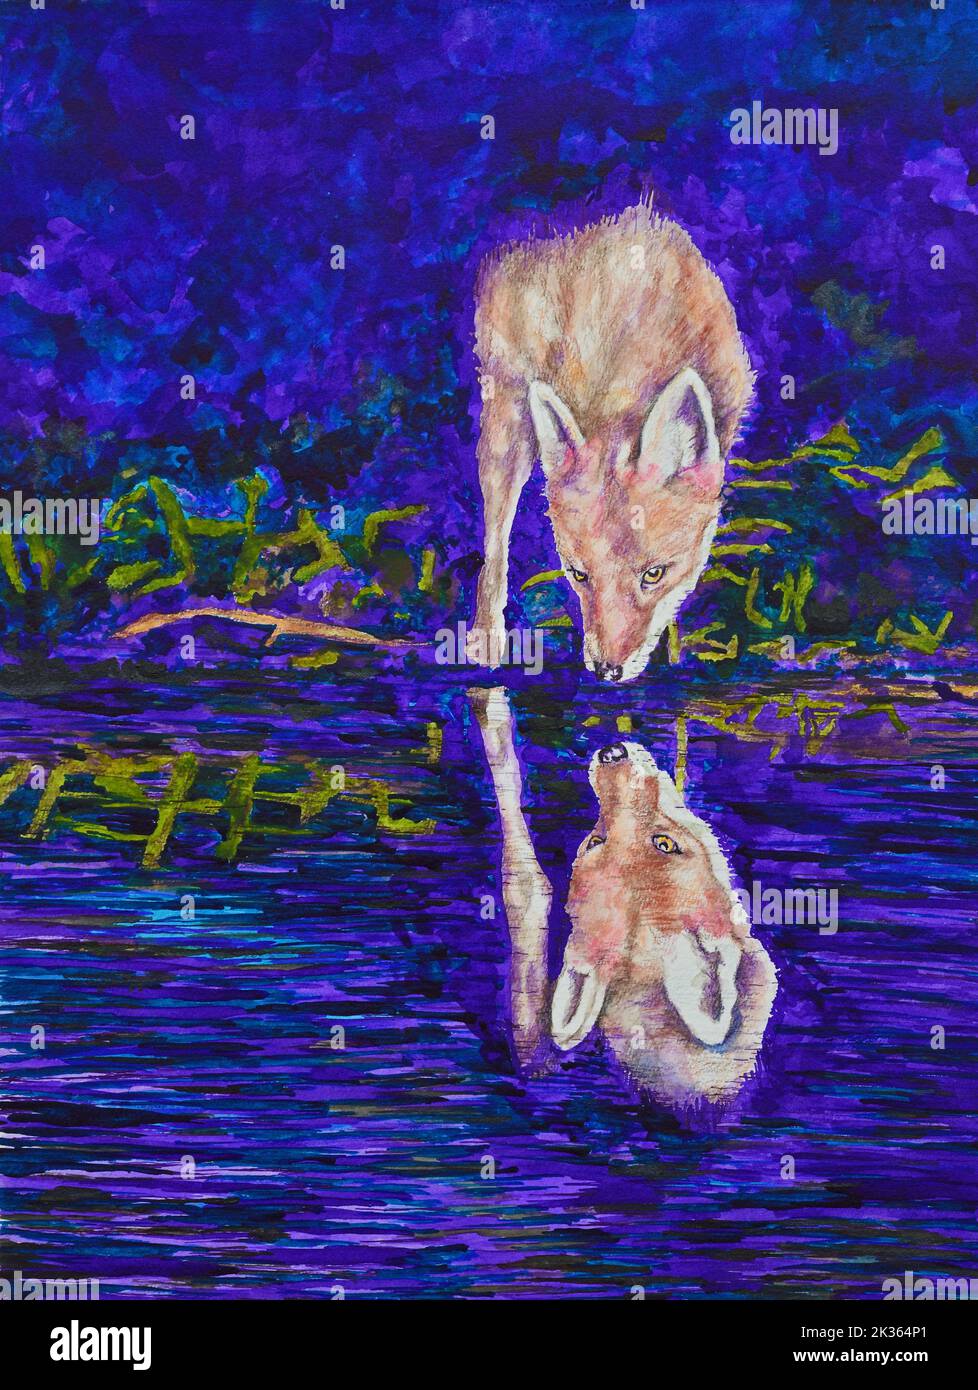 Painting of Fox  with reflection in water Stock Photo